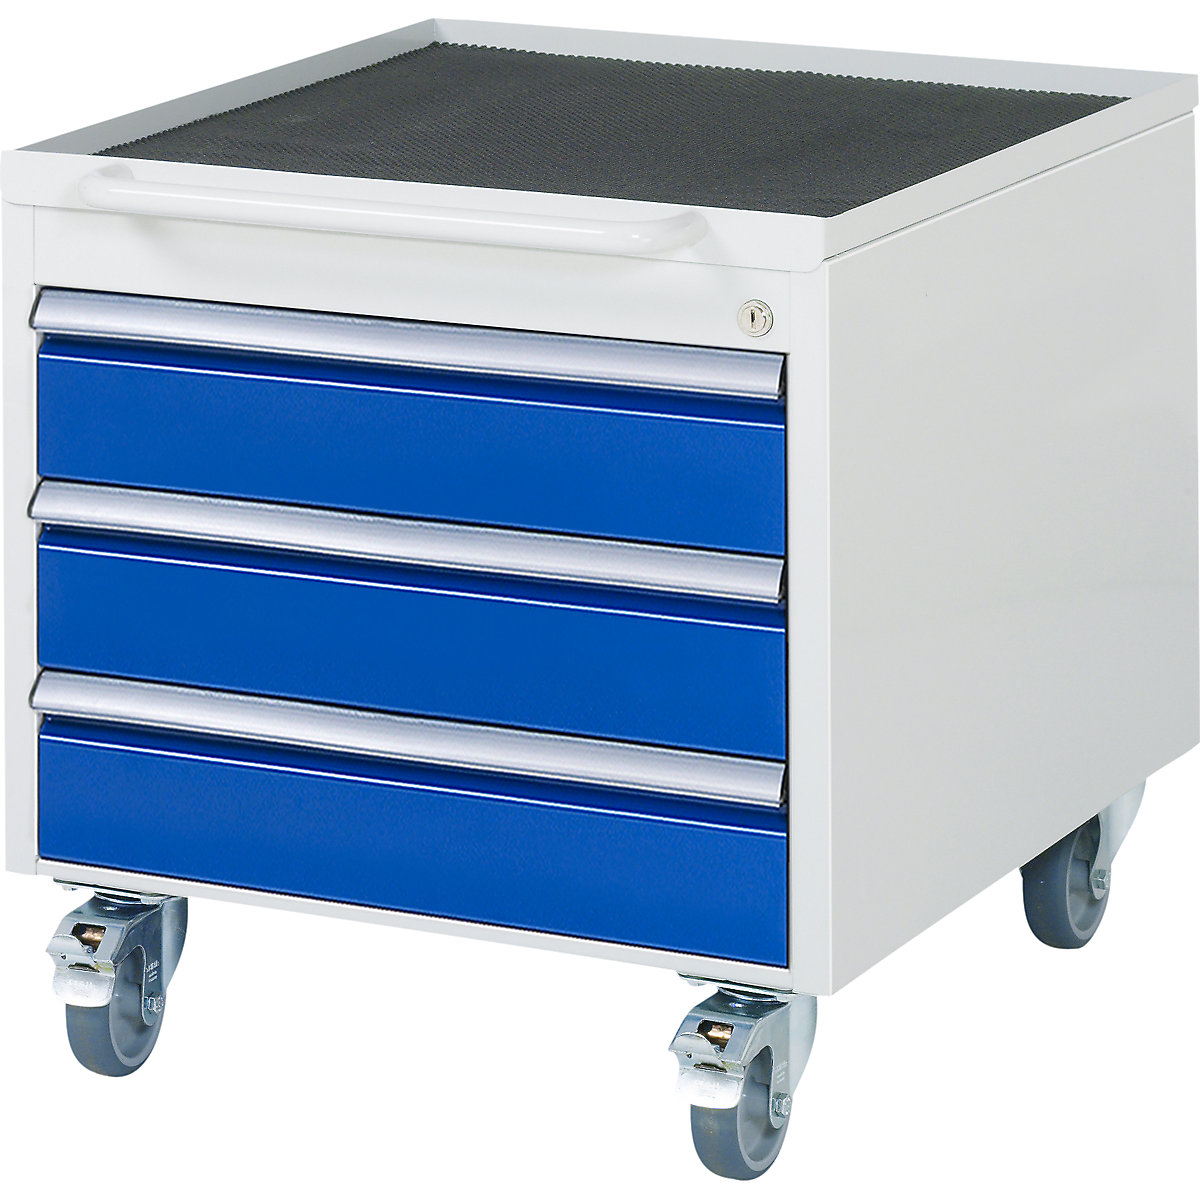 Rolcontainer serie 7000 – RAU